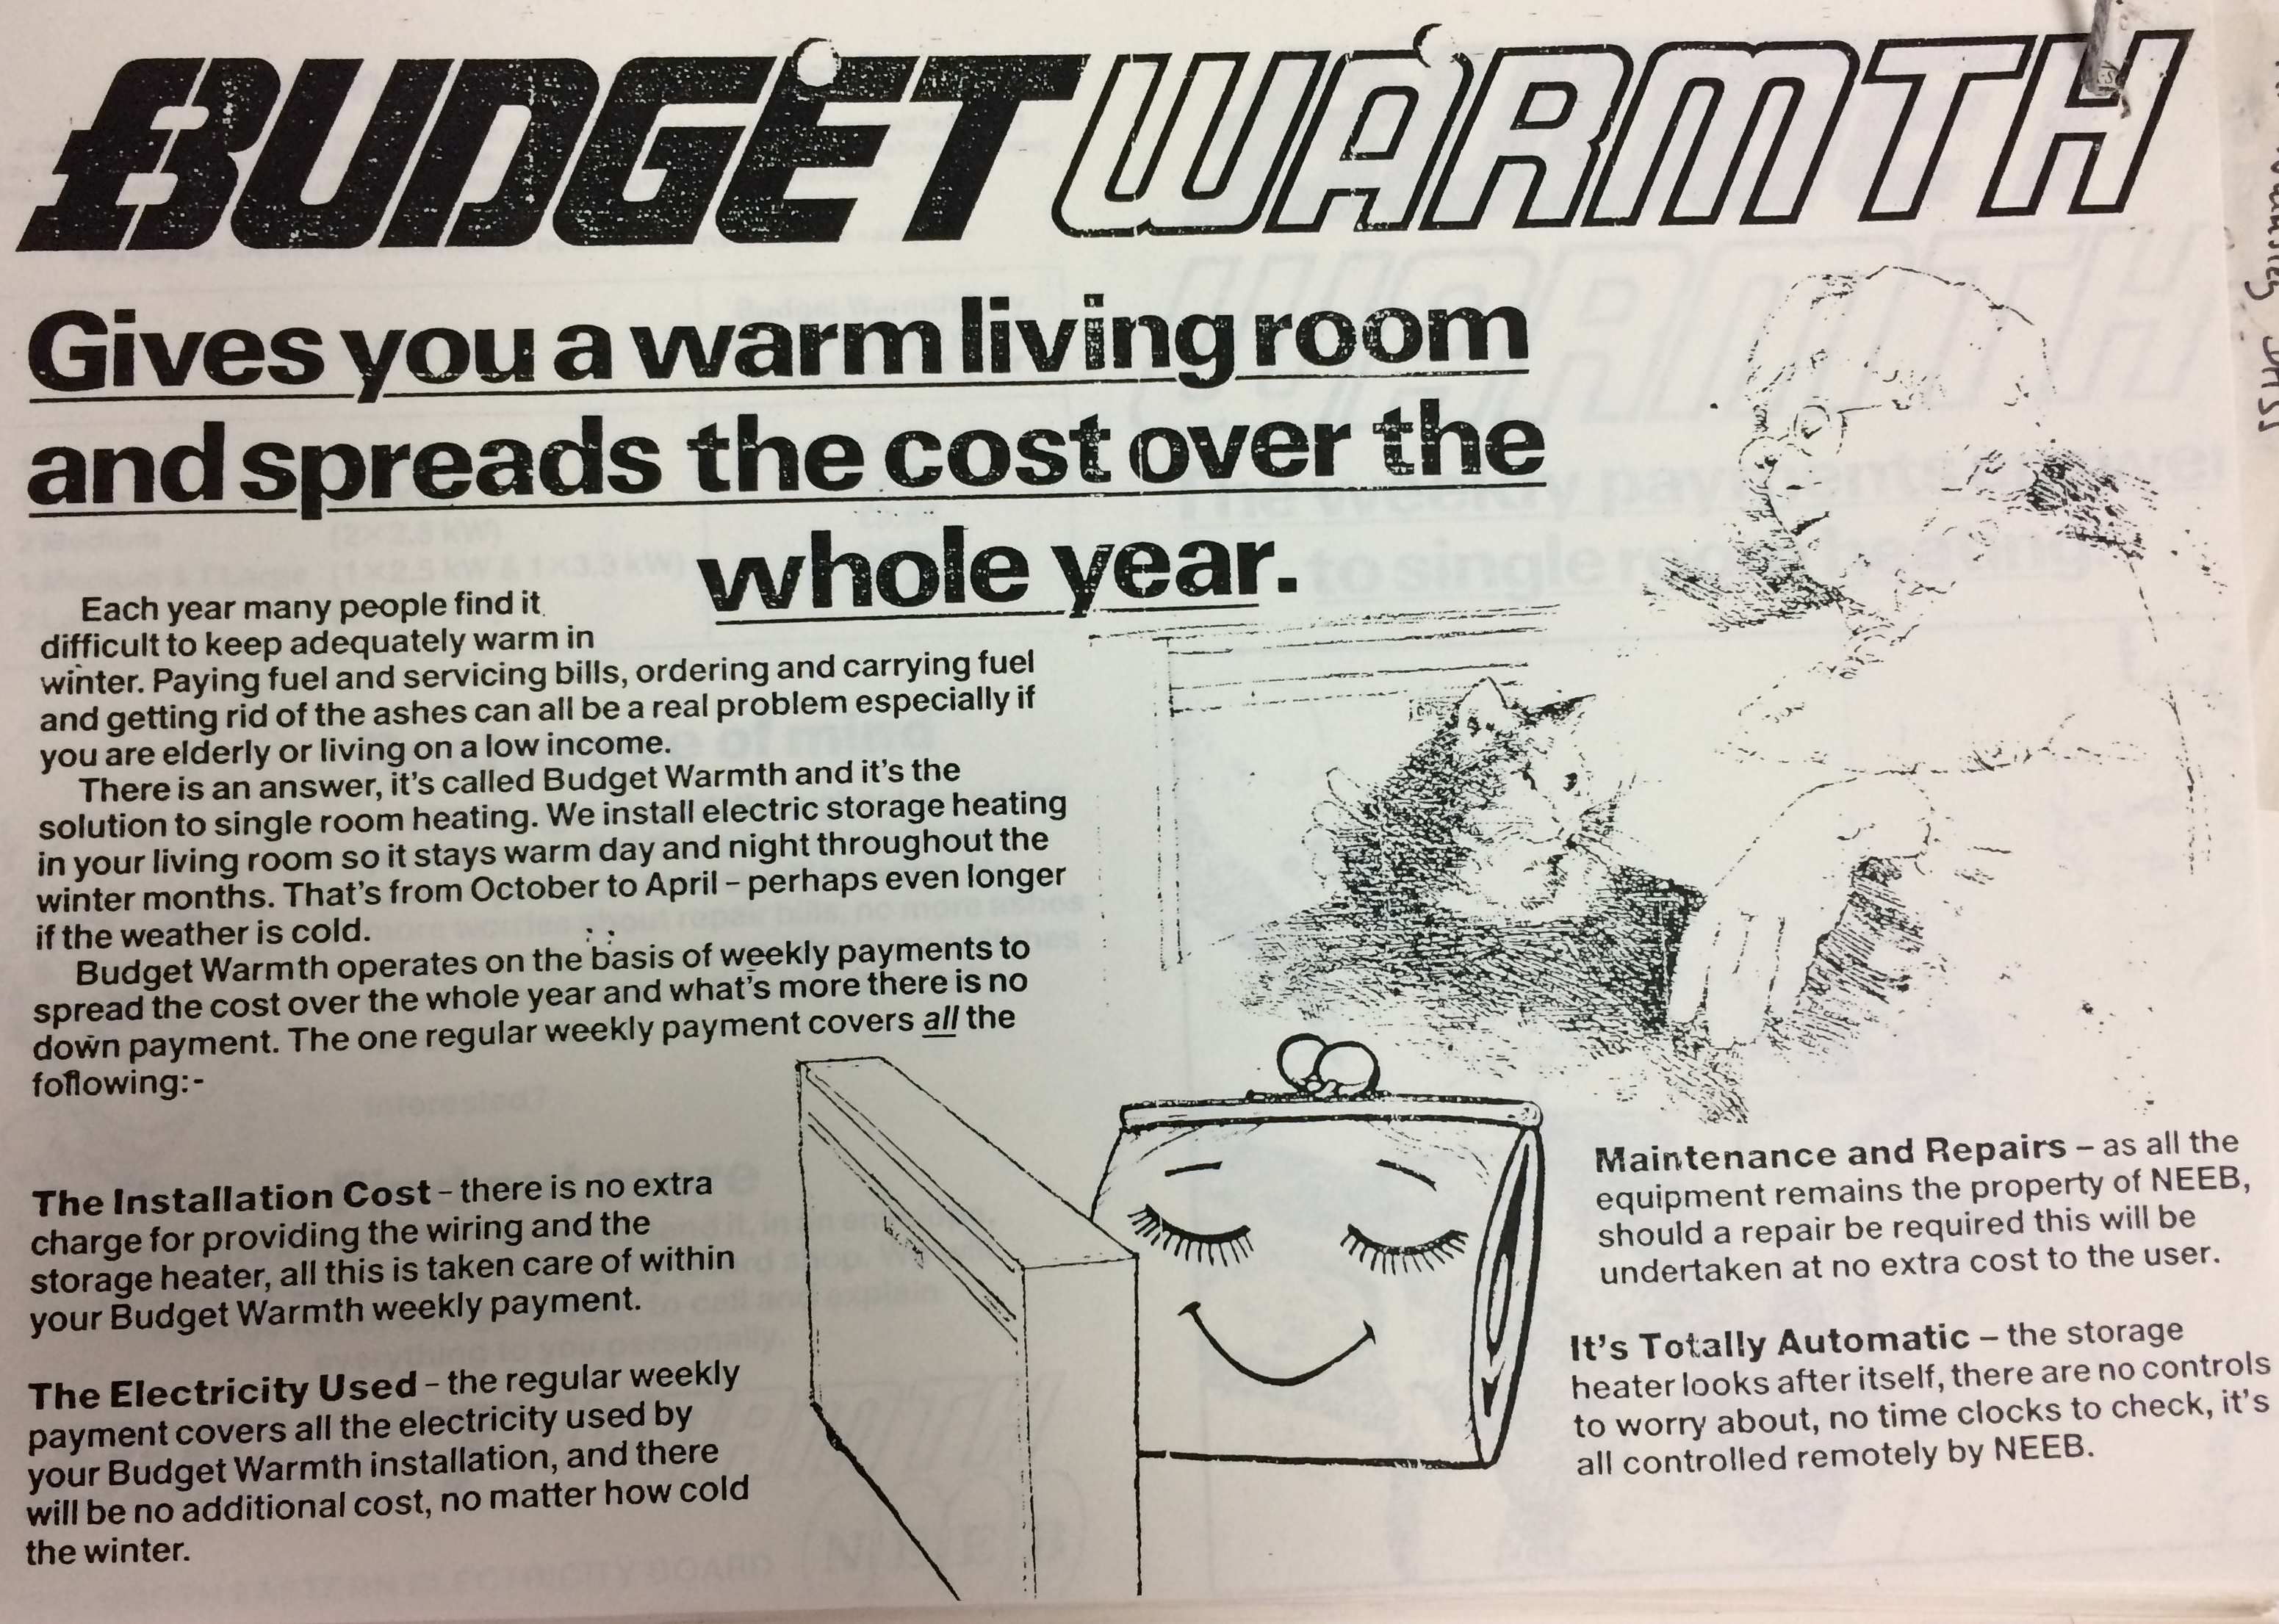 Figure 1: North Eastern Electricity Board leaflet promoting Budget Warmth (North Eastern Electricity Board, Box Number 146/157, 1986, National Archives, London) P. 9